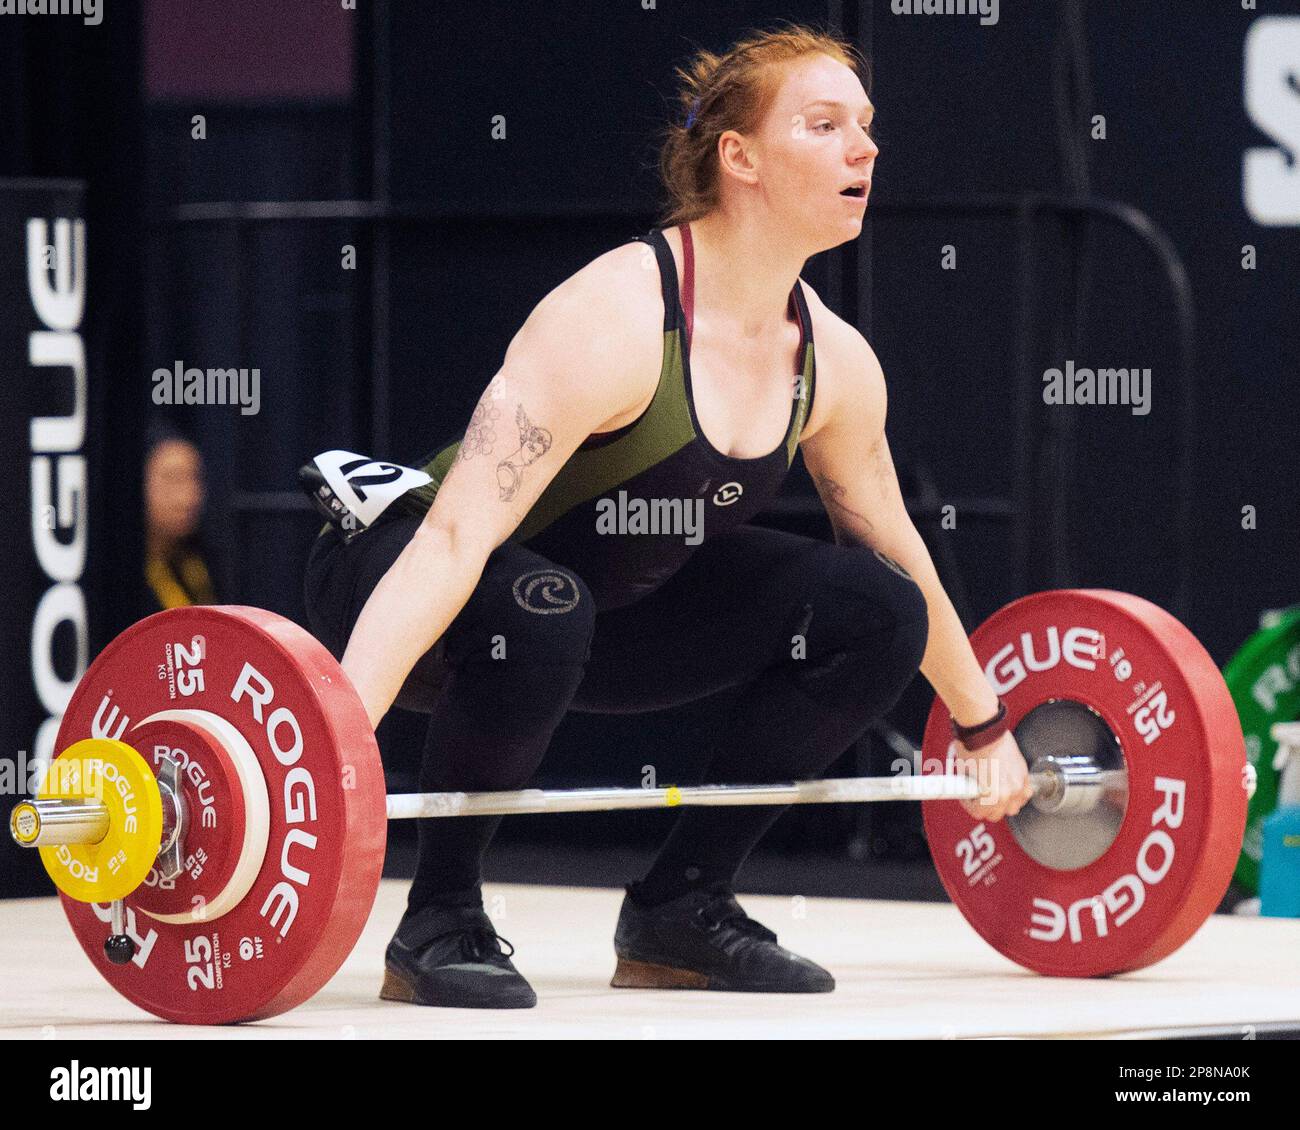 Columbus, Ohio, United States. 3th Mar, 2023. Katherine Esptep competes in the snatch in the Women's 59kg category at the Rogue Stage in Columbus, Ohio, USA. Credit: Brent Clark/Alamy Live News Stock Photo